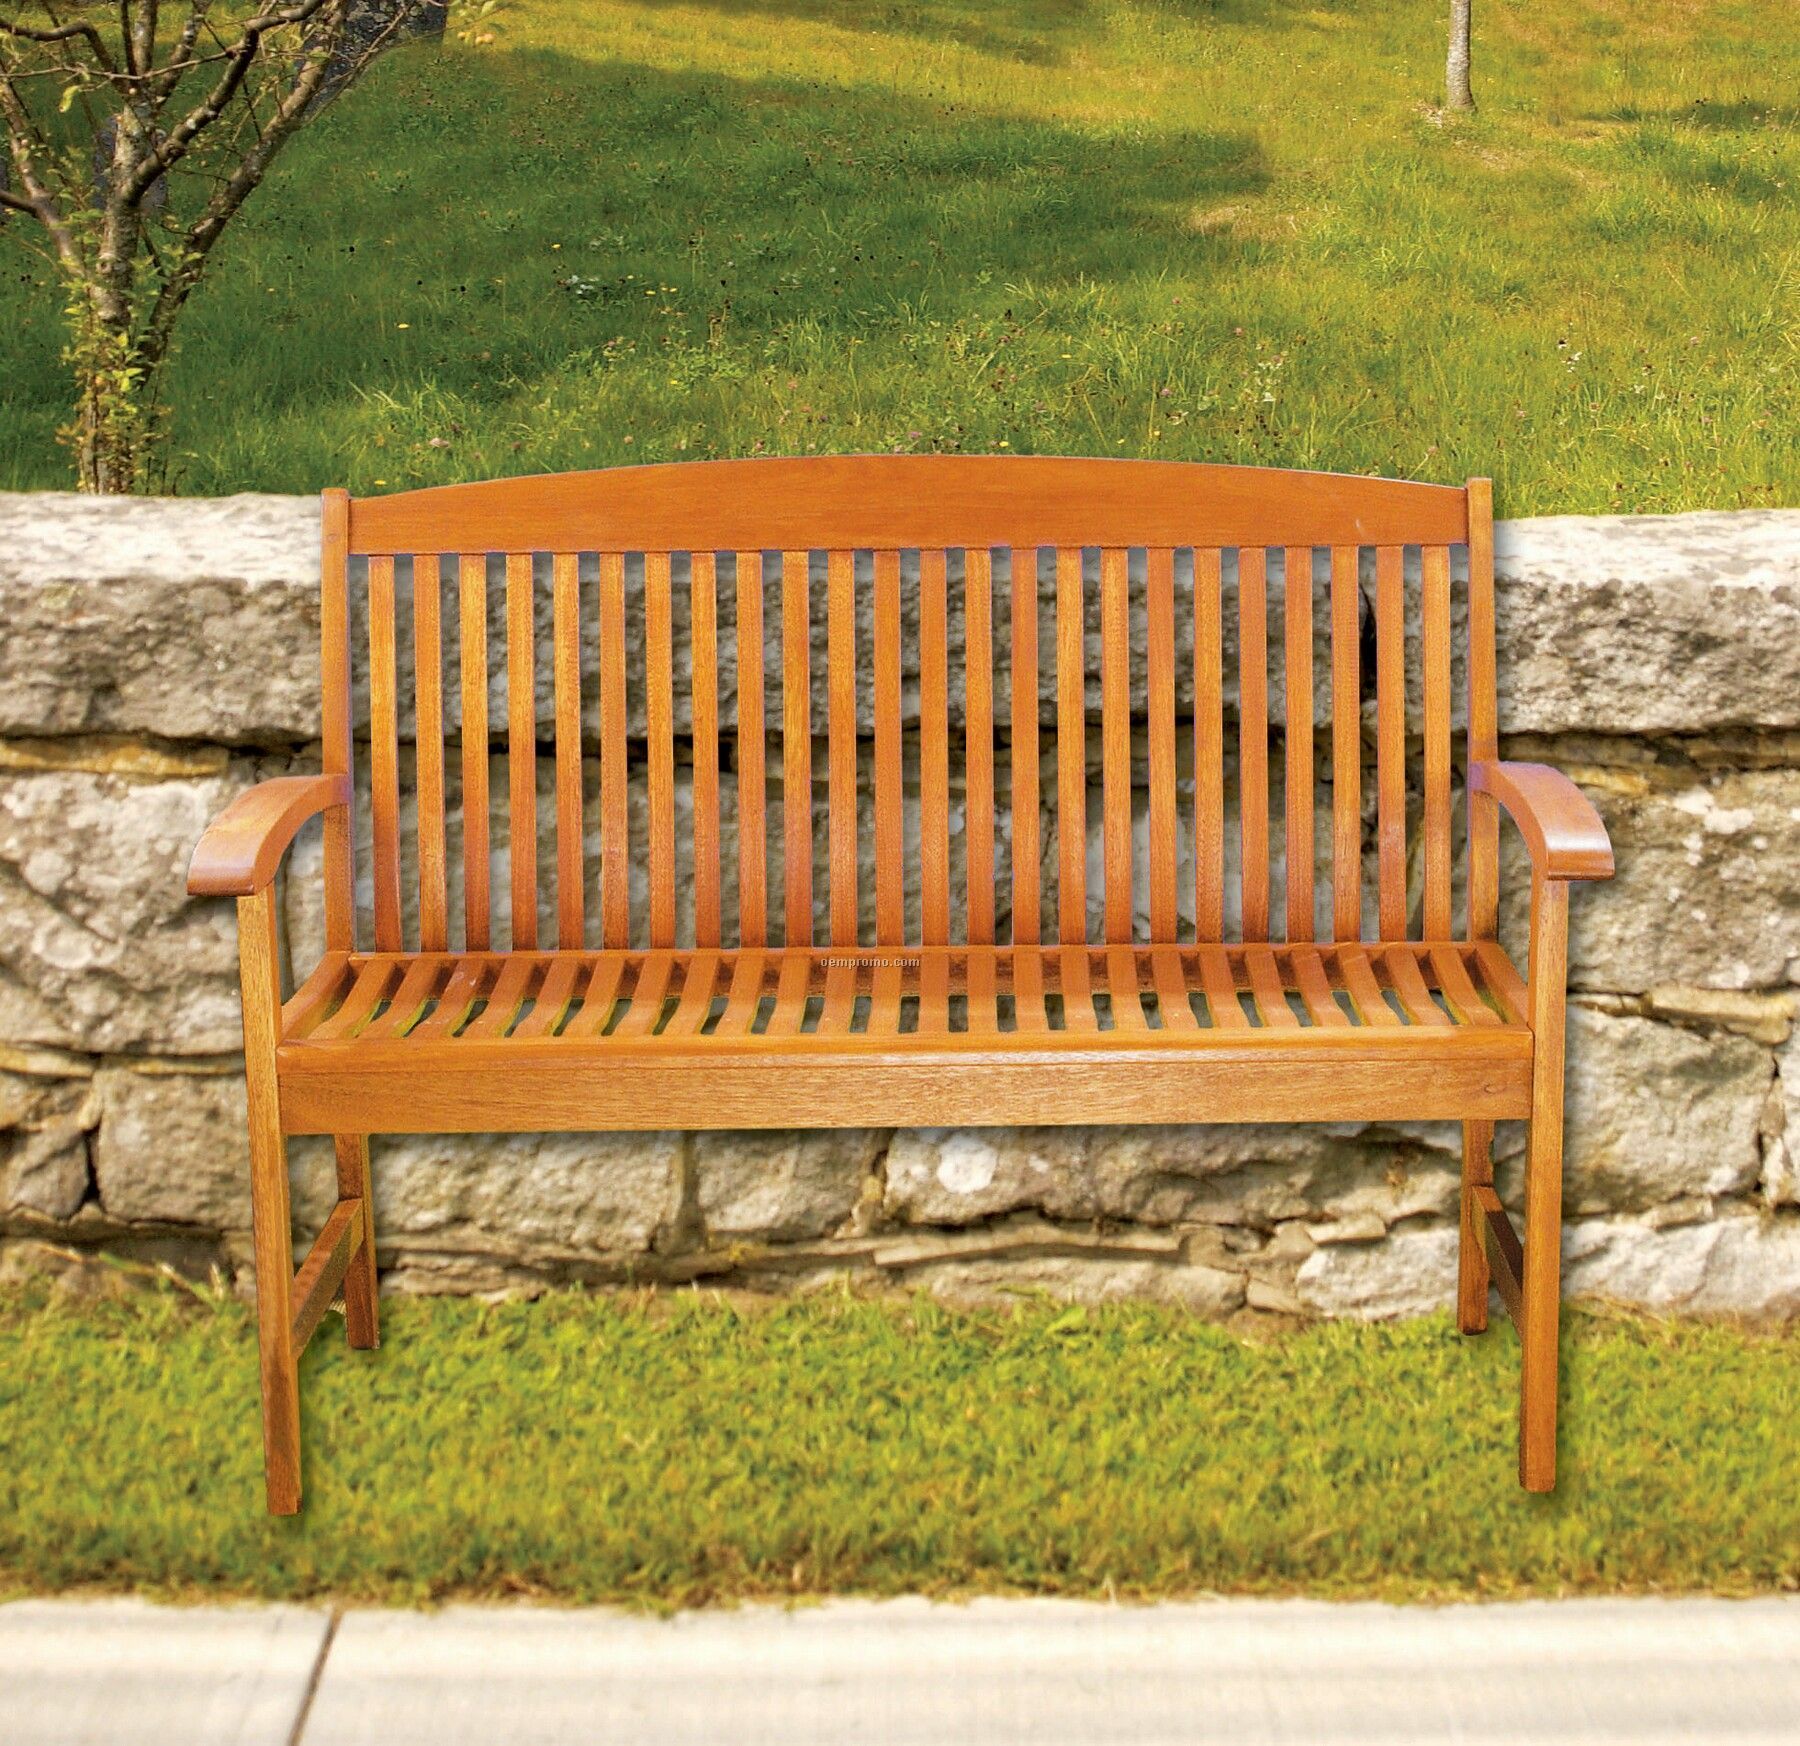 Achla Designs 4-ft. Classic Stat Bench